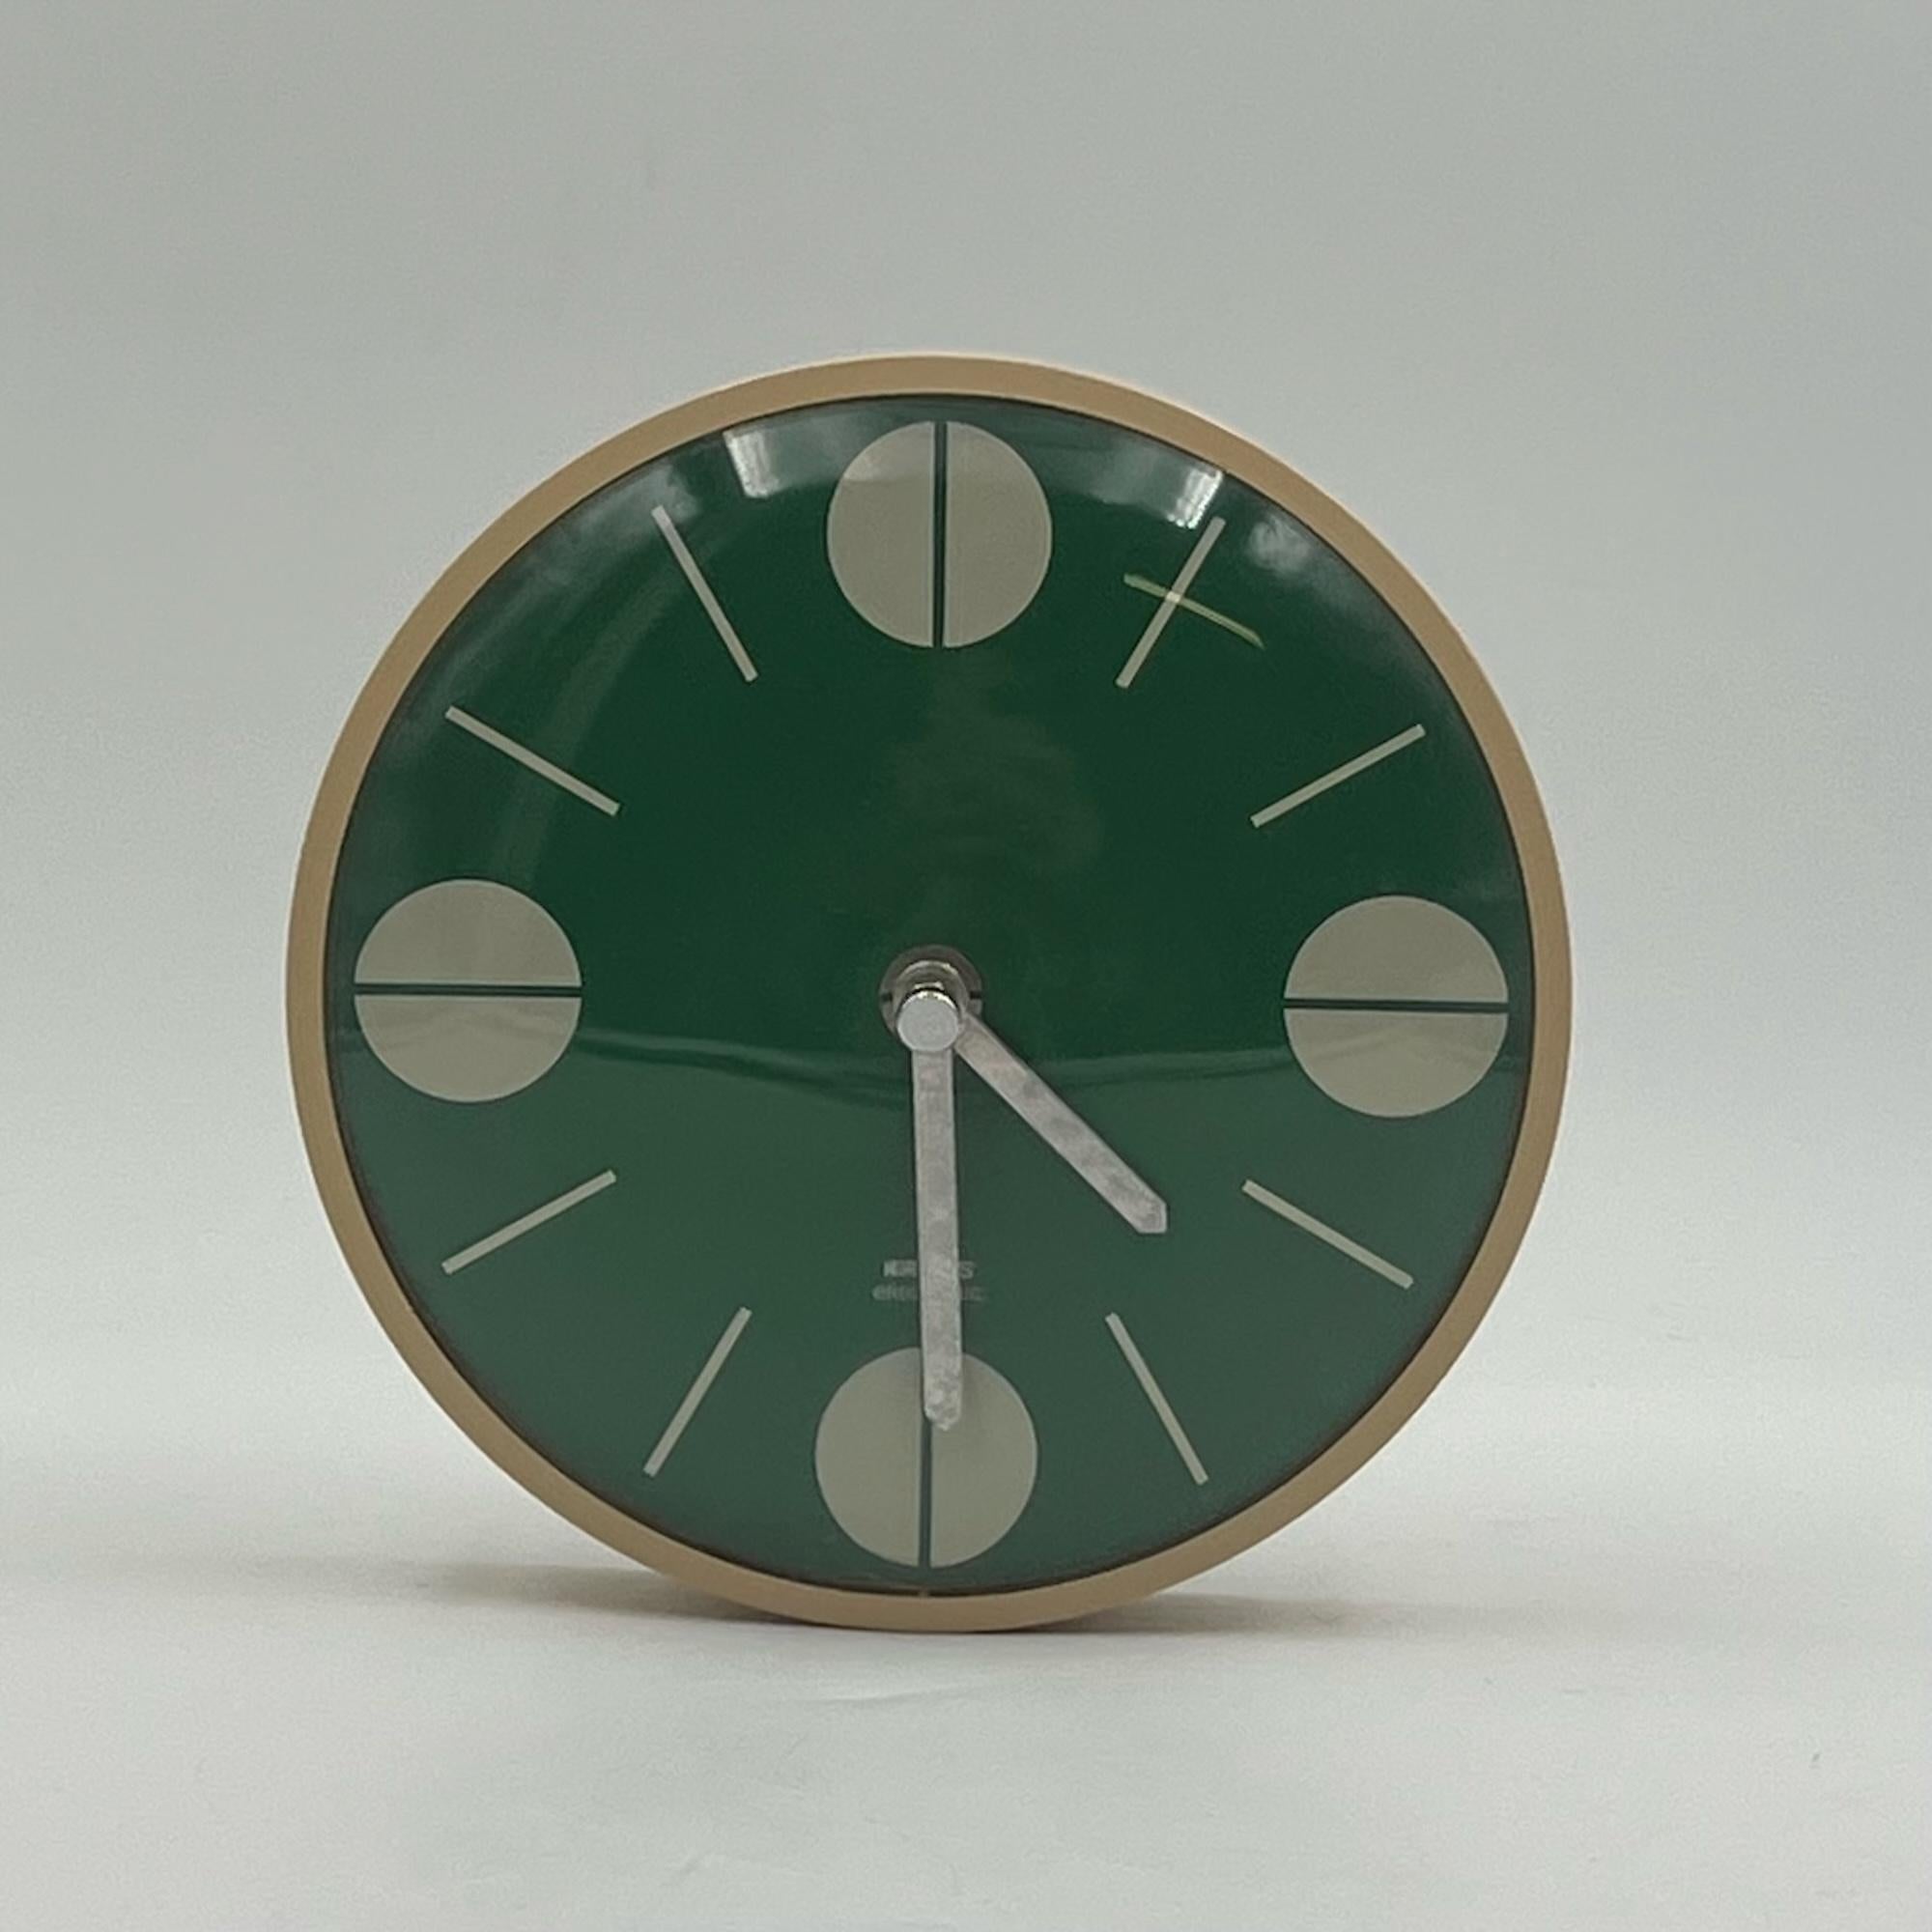 Dive into the retro-futuristic charm of the 1970s with this stunning space age wall clock by Krups Germany. Renowned for their quality craftsmanship, Krups presents a rare gem from the era, featuring a striking green hue that sets it apart from the